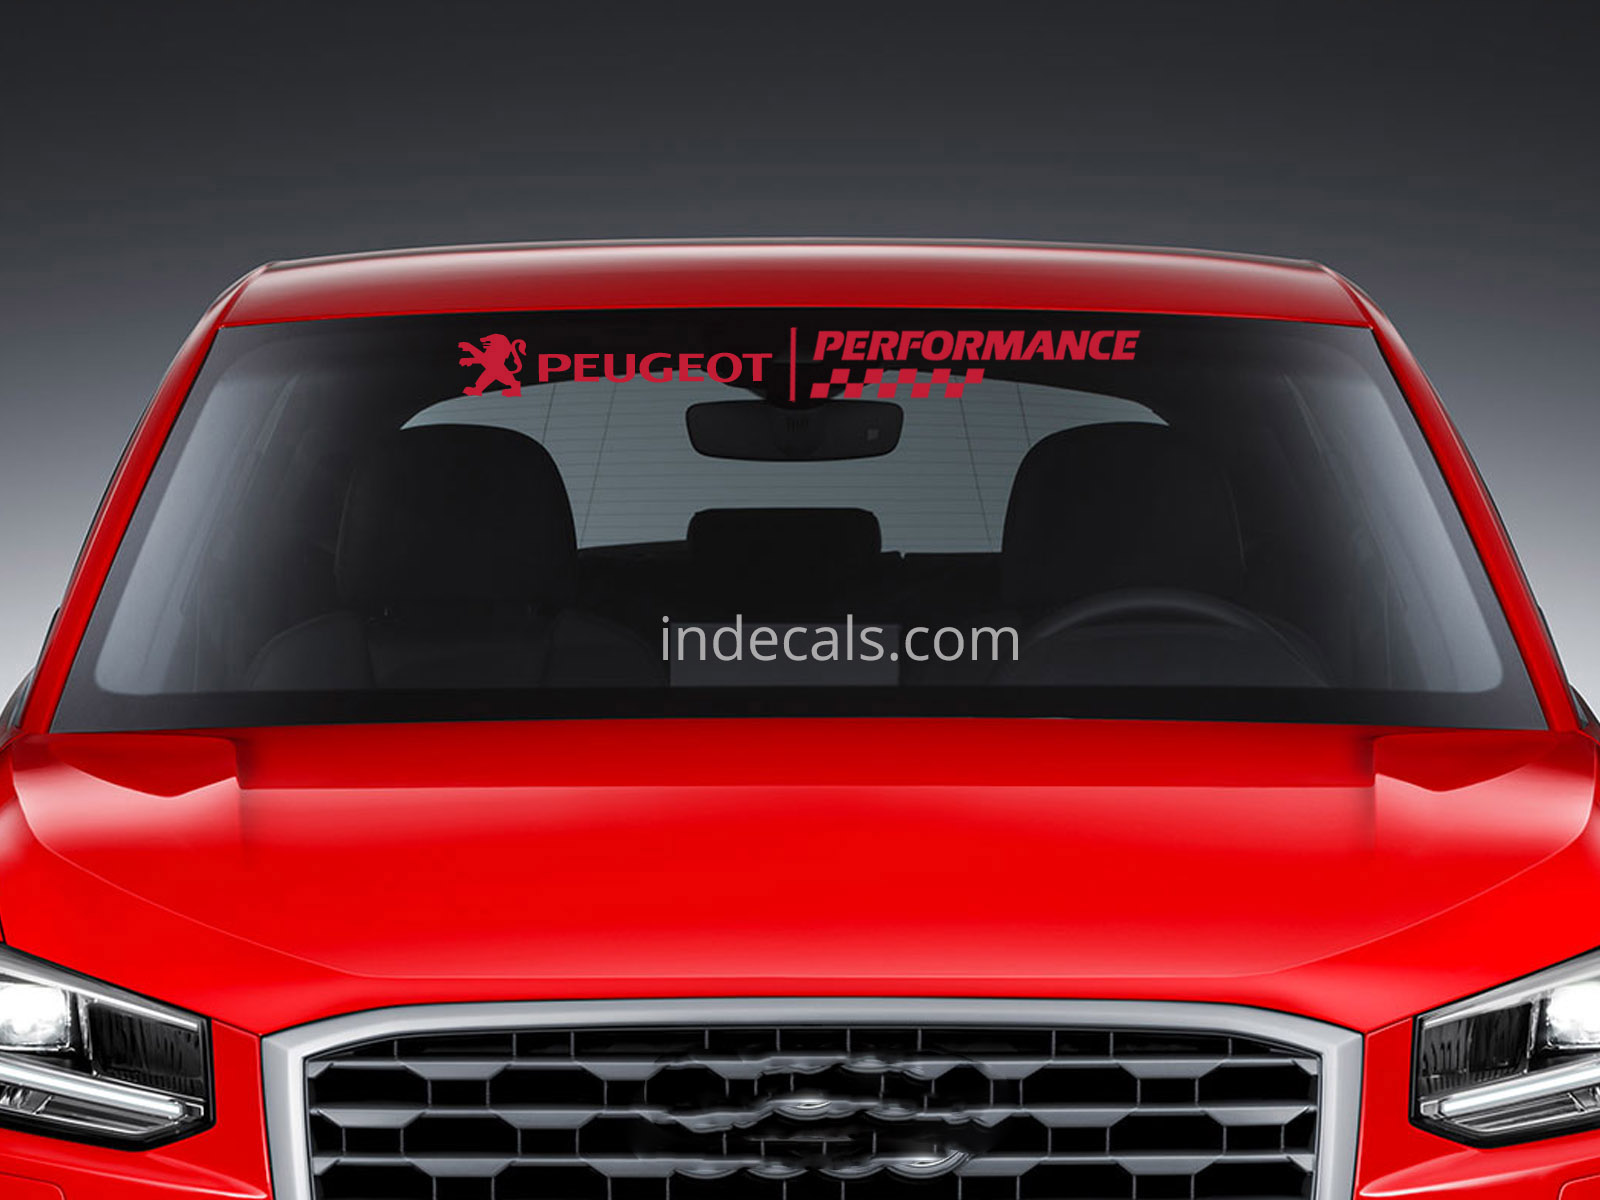 1 x Peugeot Performance Sticker for Windshield or Back Window - Red